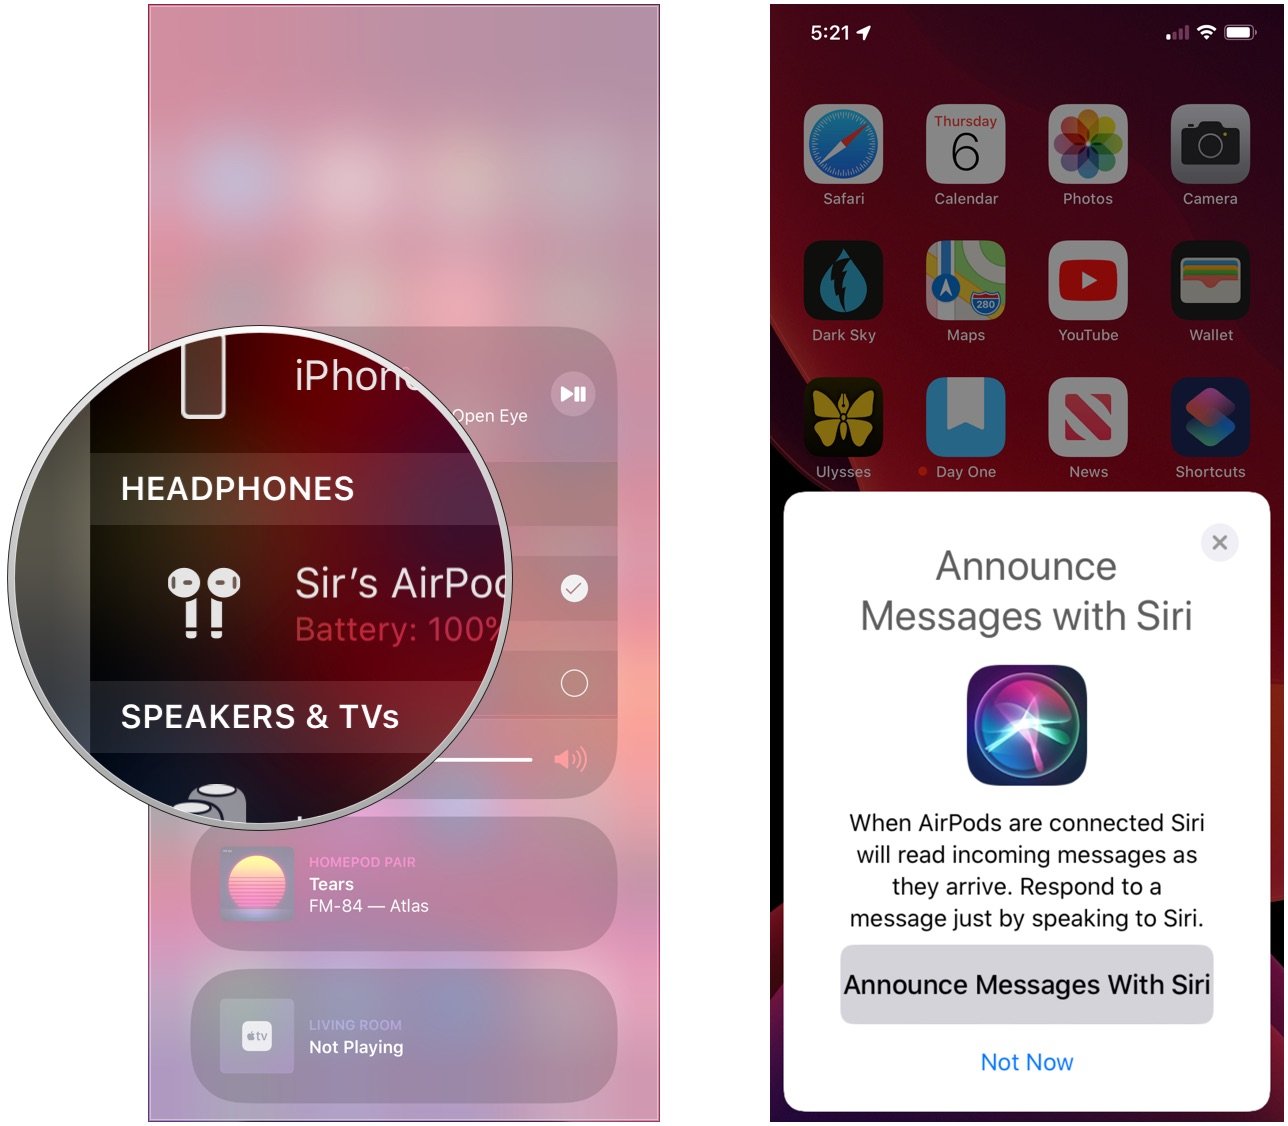 Pair AirPods, tap Announce Messages with Siri